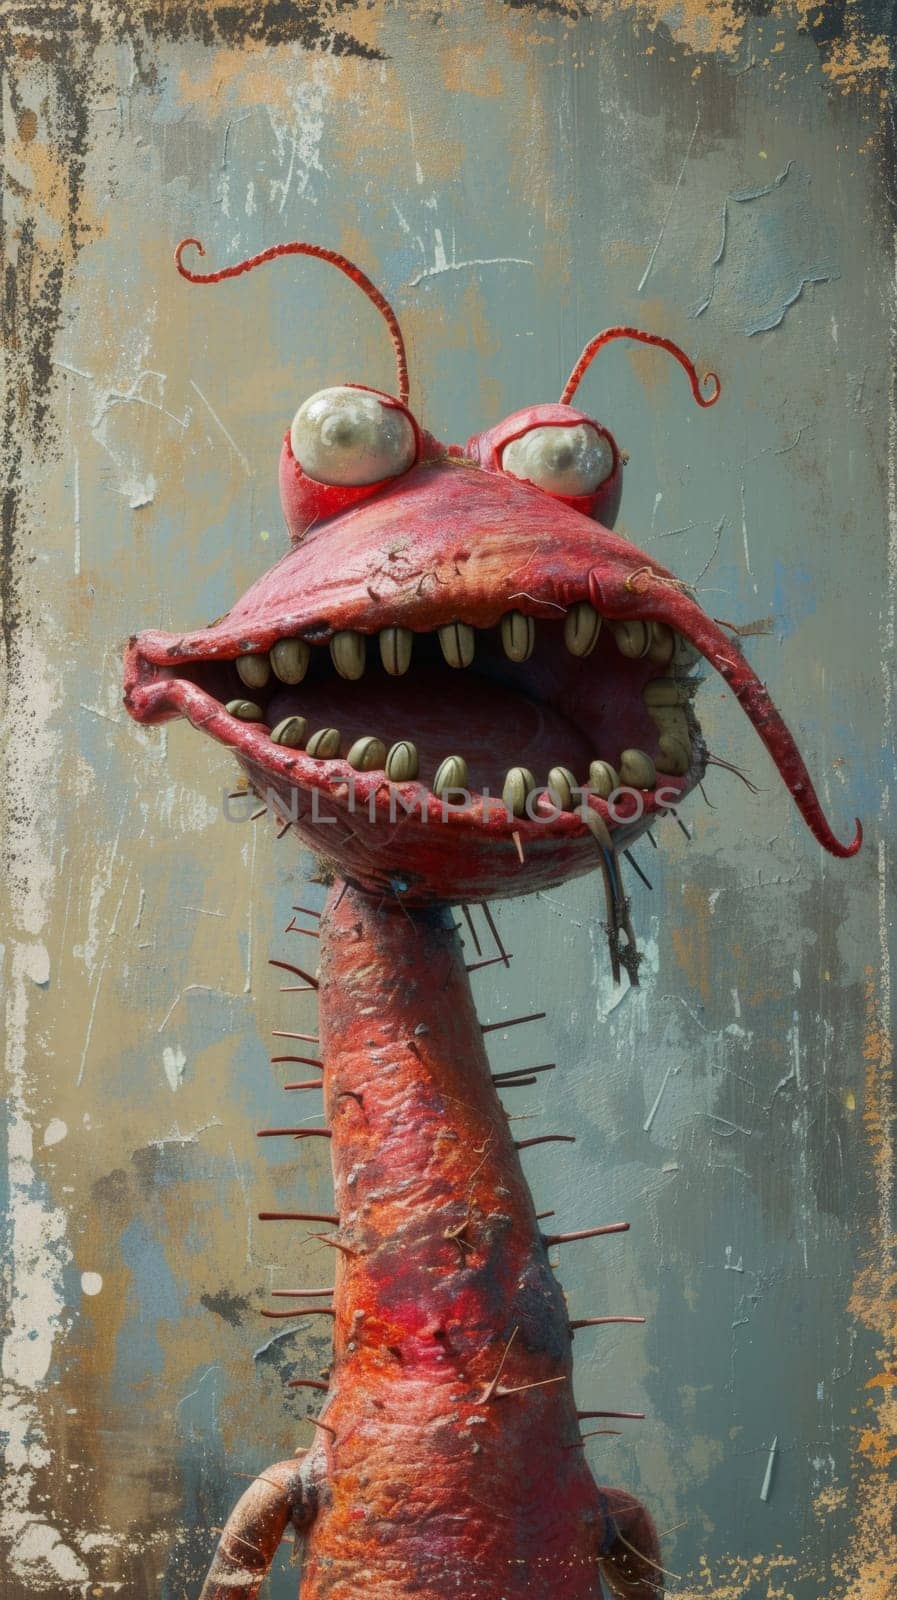 A close up of a red monster with spikes on its face, AI by starush